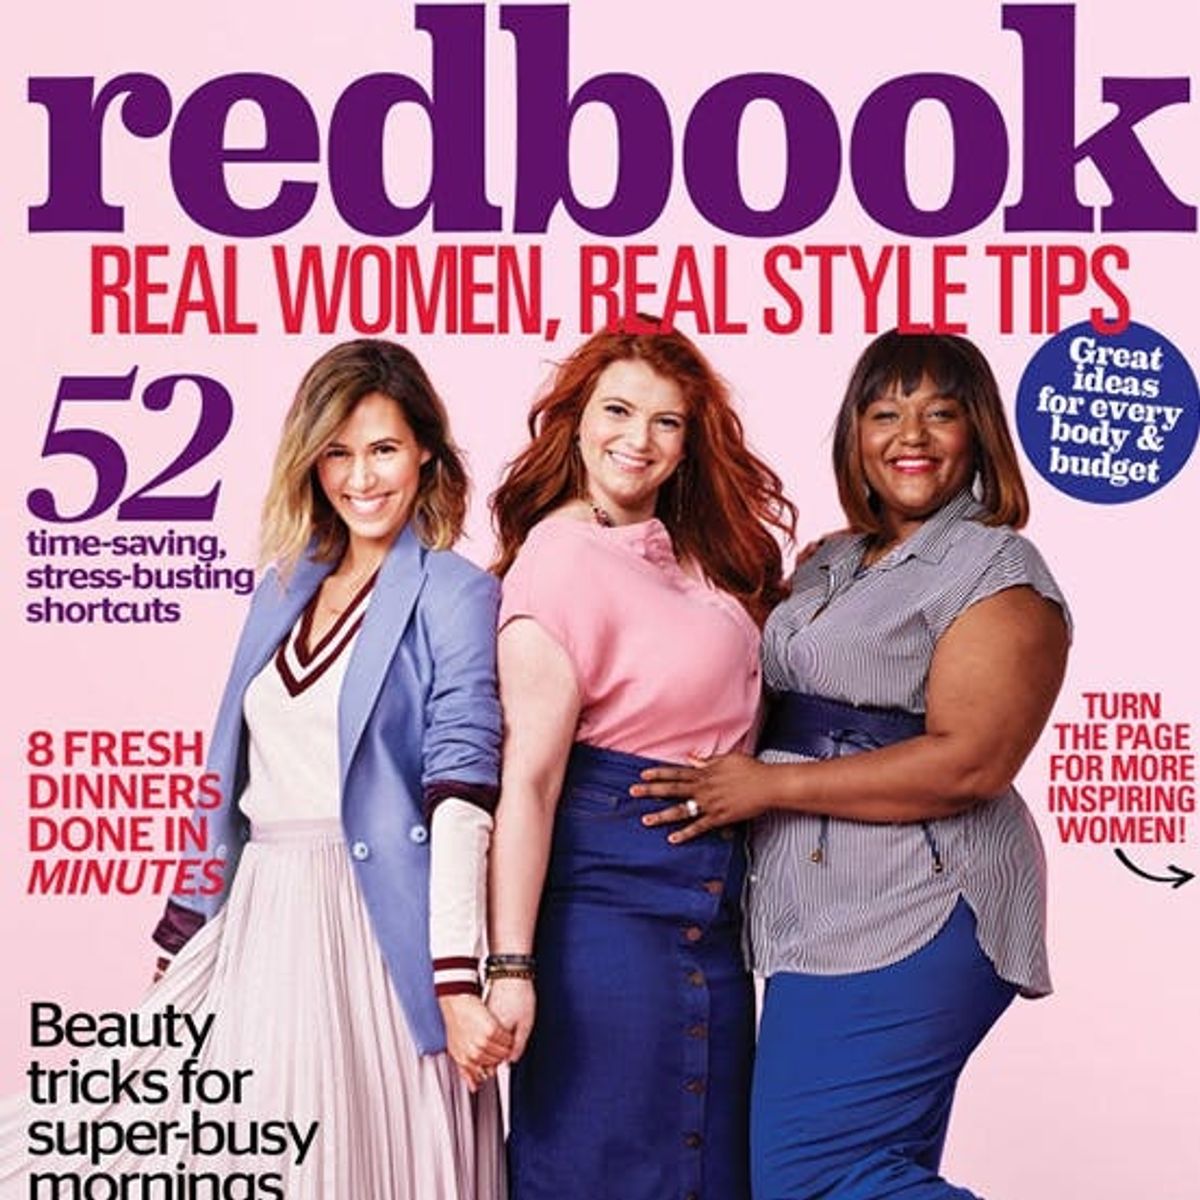 Redbook Made a Bold Move for Their September Issue Cover Girl